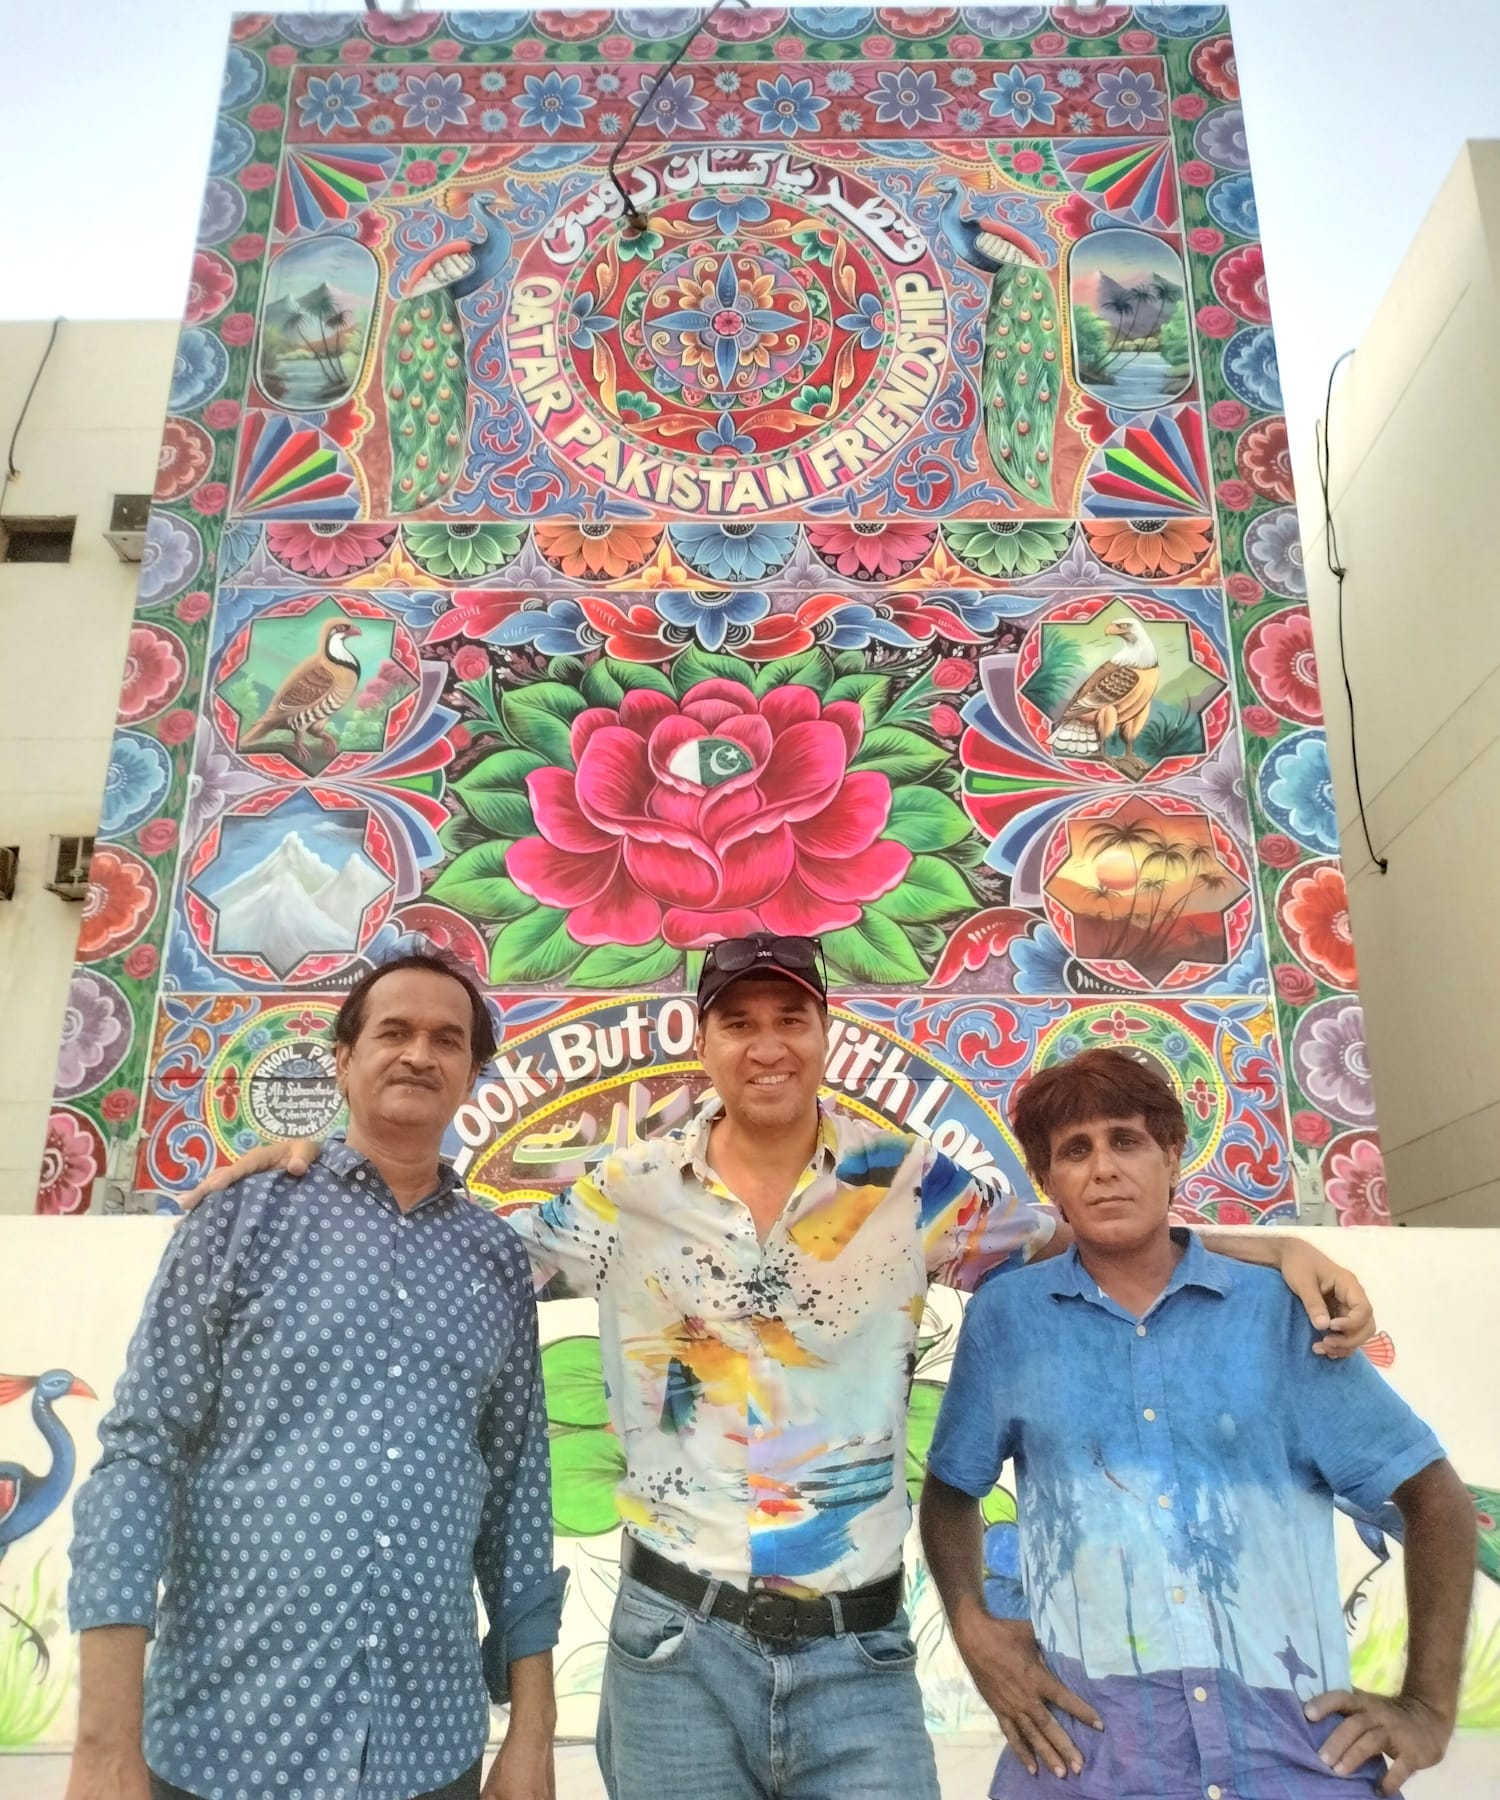 Three men standing in front of a very tall mural consisting of a brightly coloured design, and smaller lettering that reads "Qatar Pakistan Friendship".